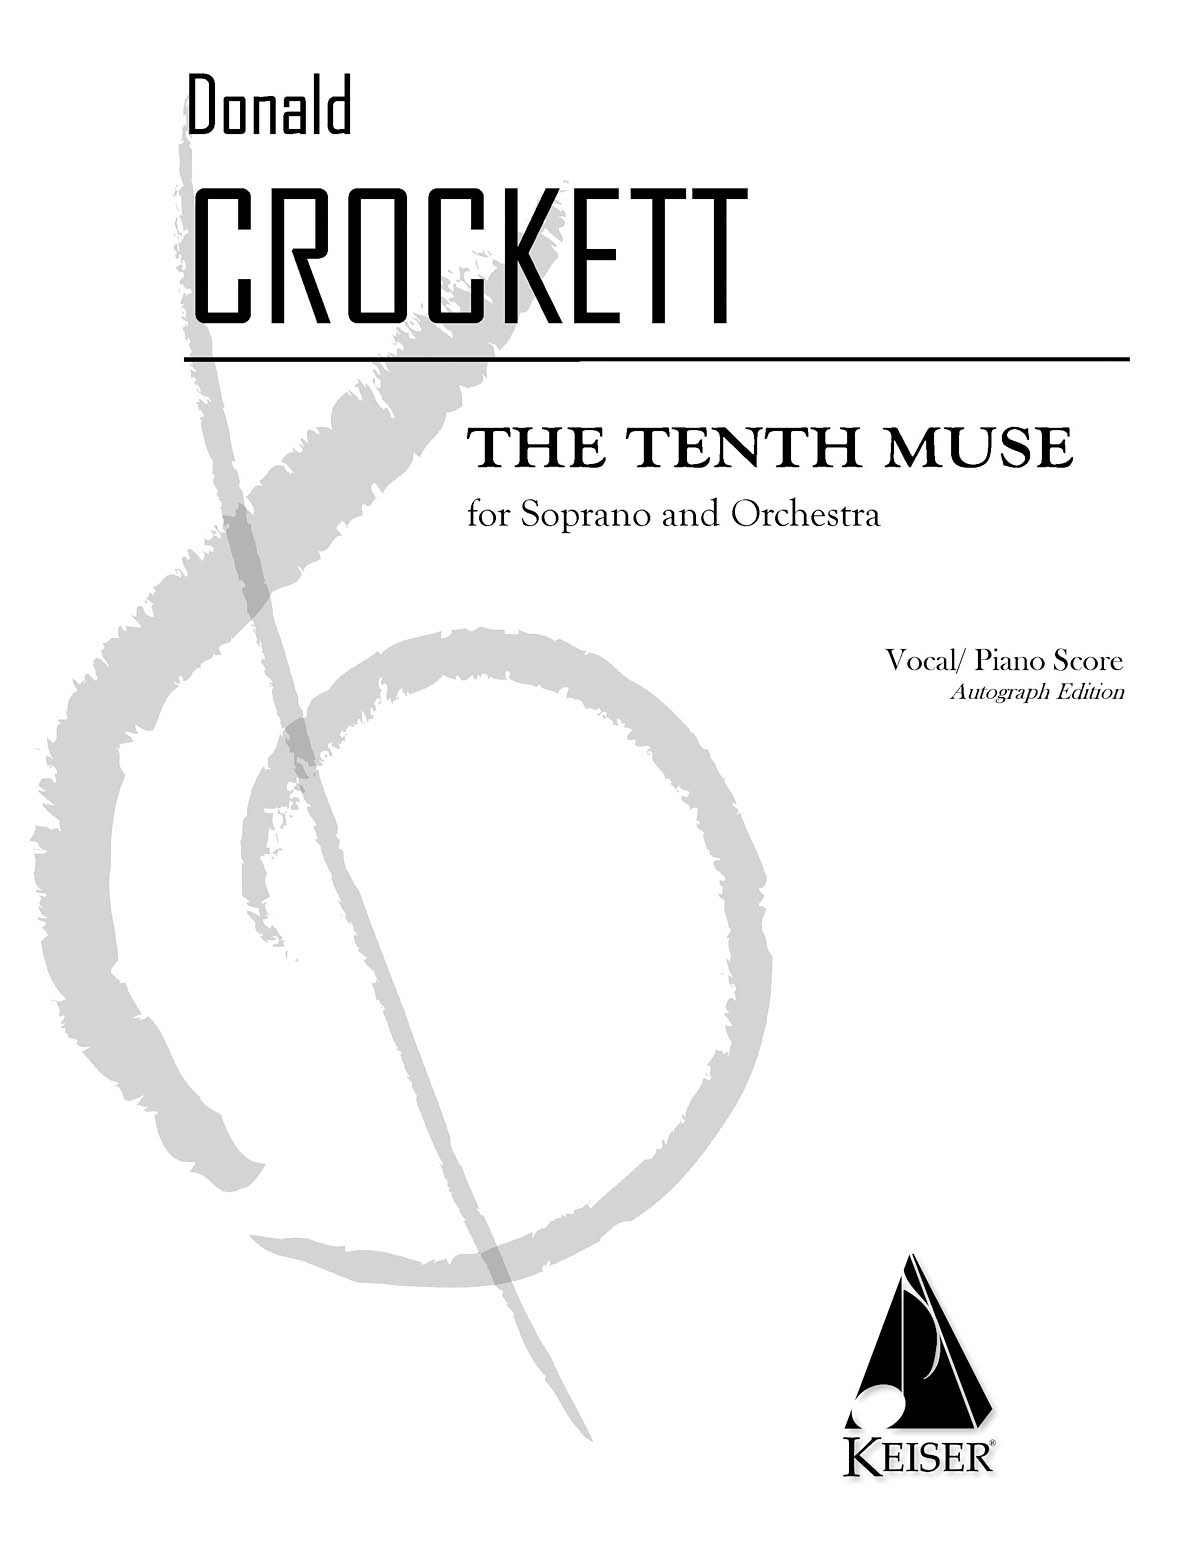 The Tenth Muse for Soprano and Orchestra: Orchestra and Vocal: Score